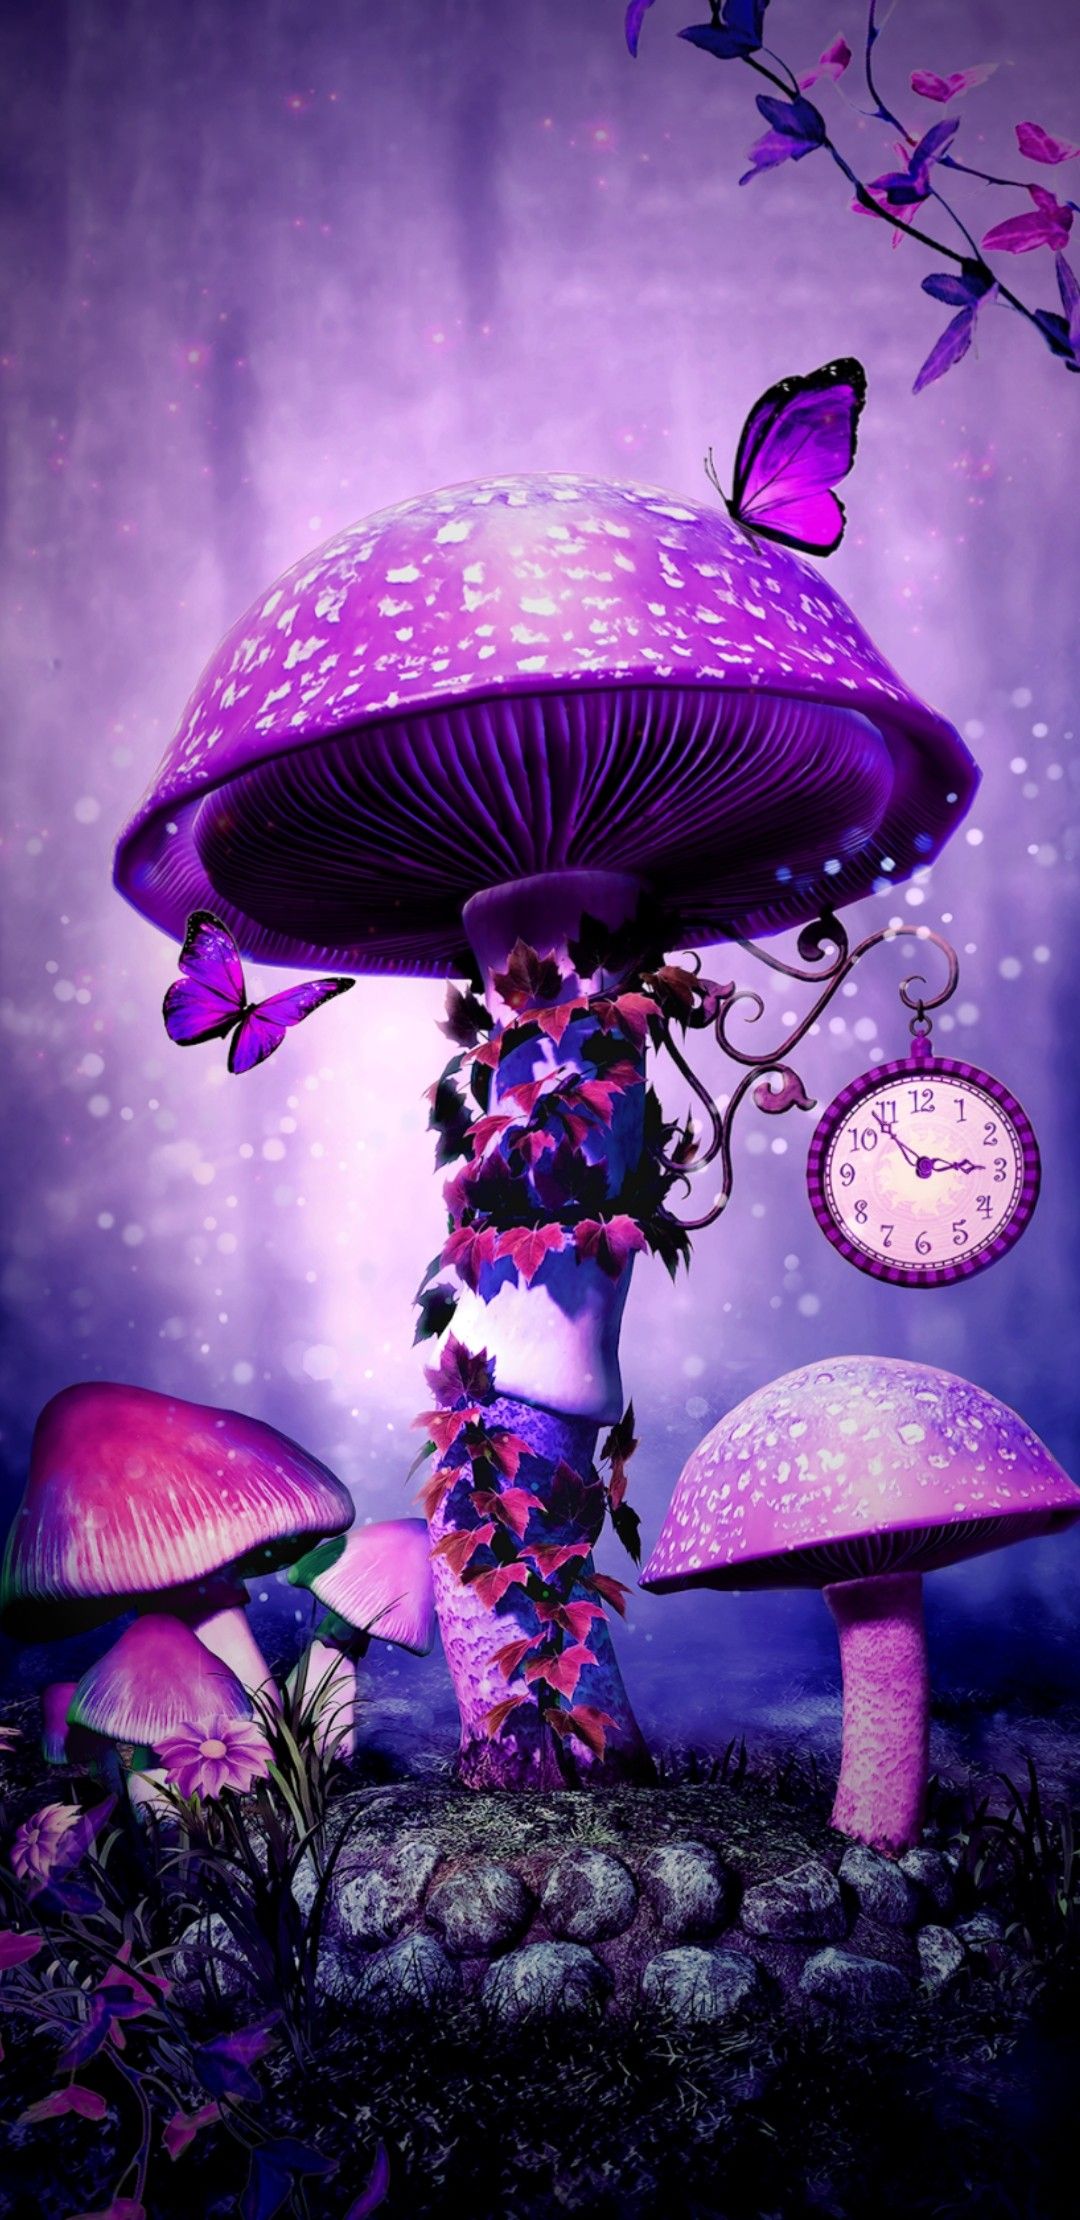 My Favrt. Mushroom art, Fairy picture, Background picture